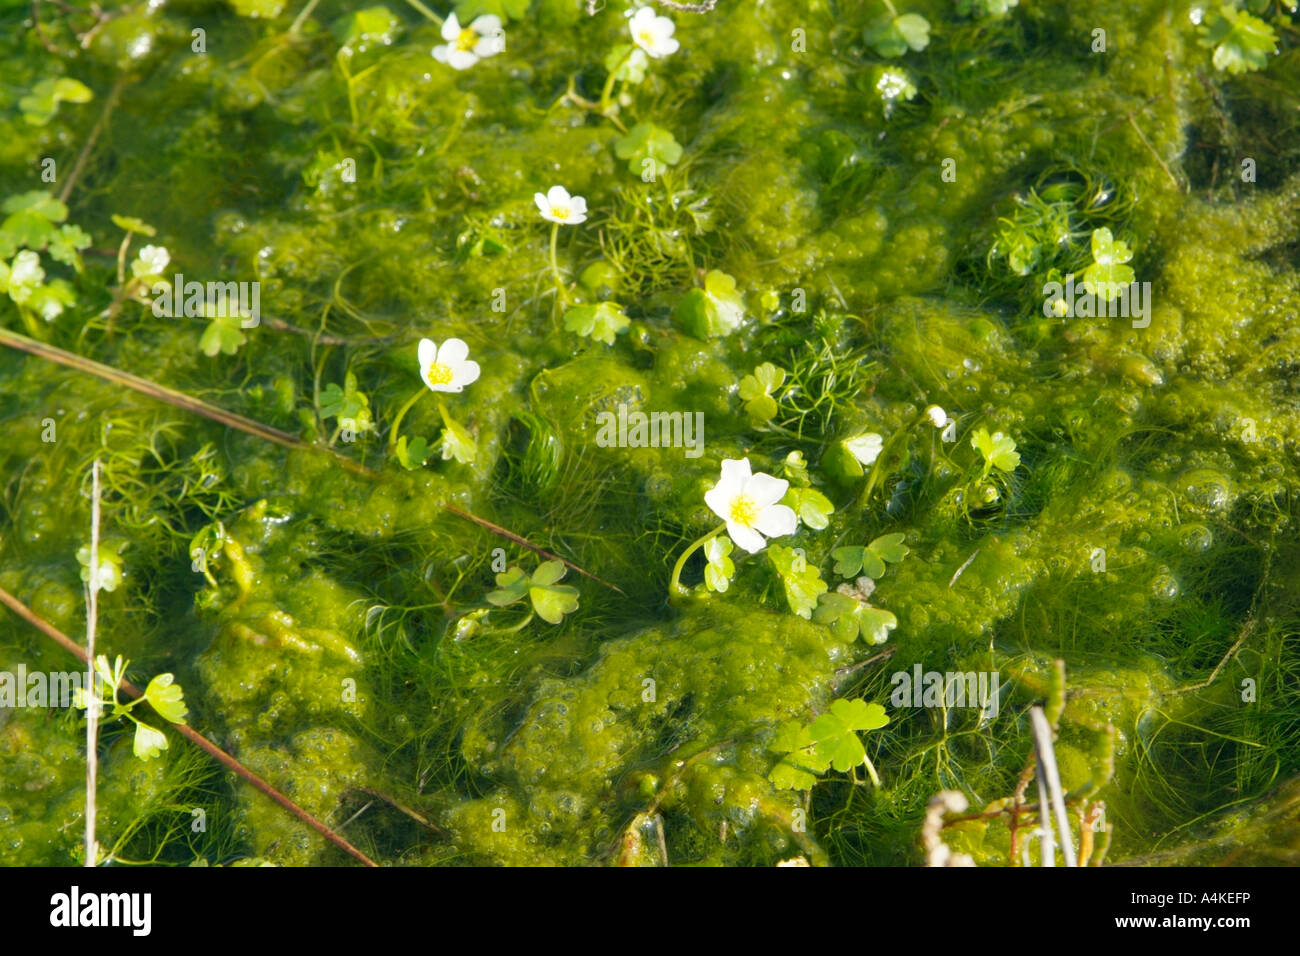 Green algal slime with small flowers Stock Photo